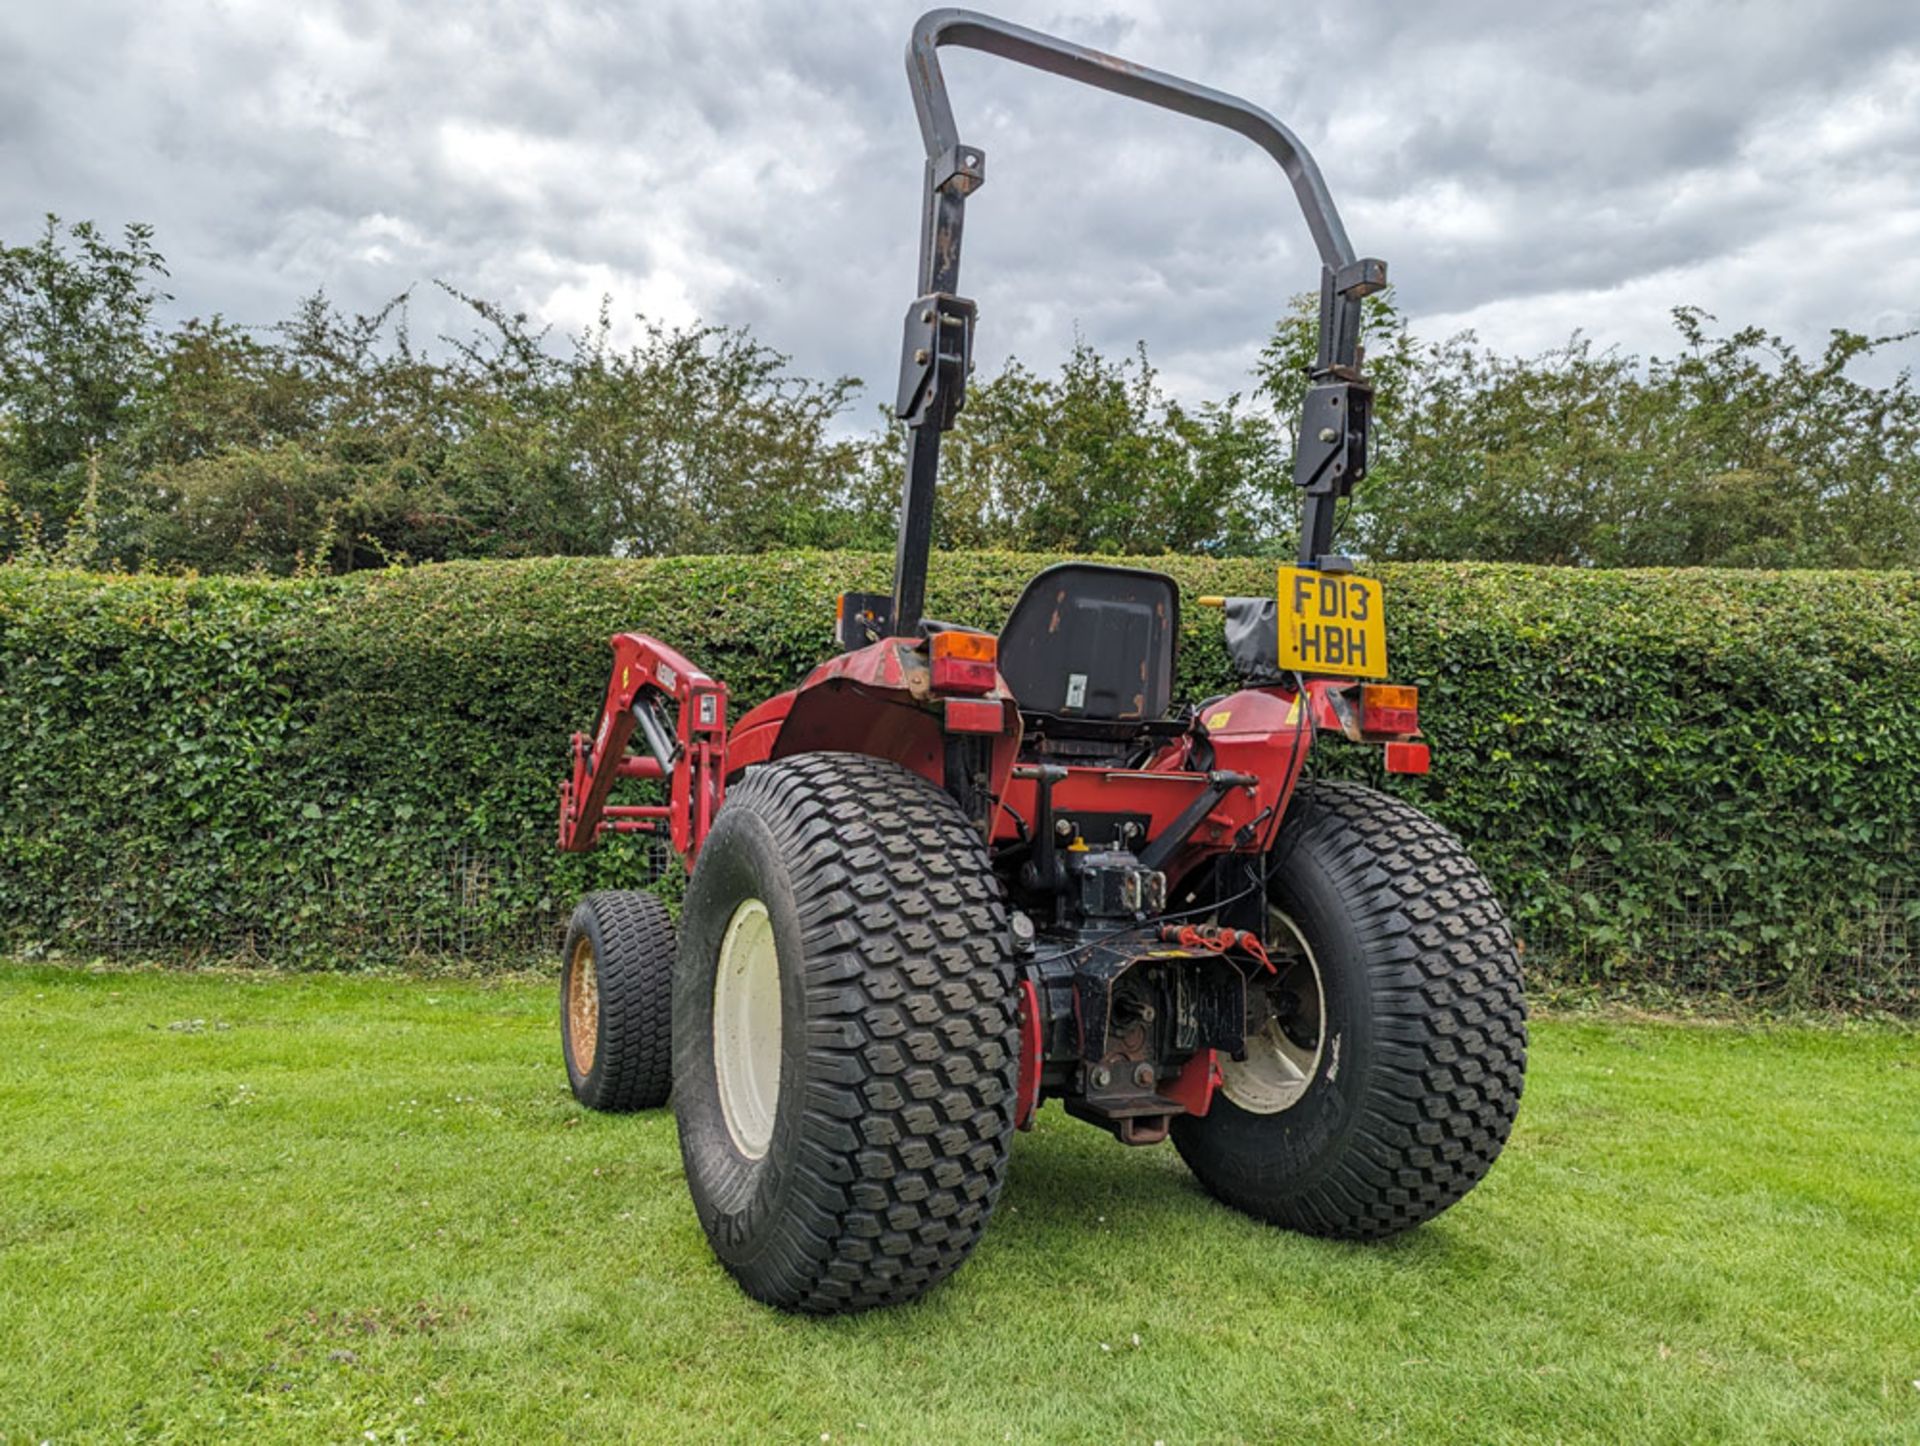 2013 Shibaura ST333 Compact Tractor With Lewis 25QH Loader Attachment 1848 Hours - Image 11 of 11